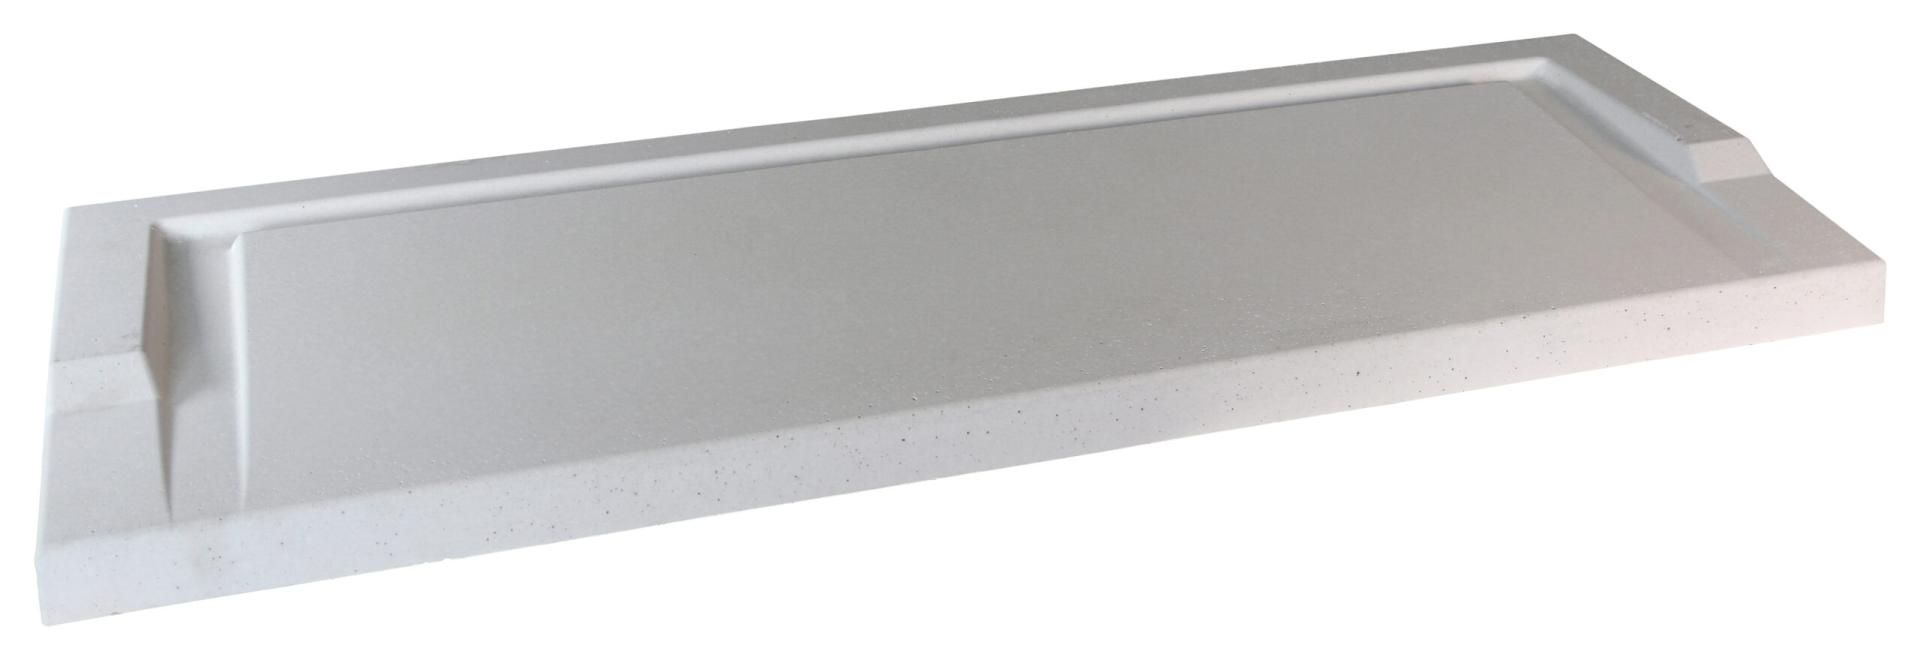 seuil-beton-pmr-lisse-35cm-140-150-daulouede-gris-0